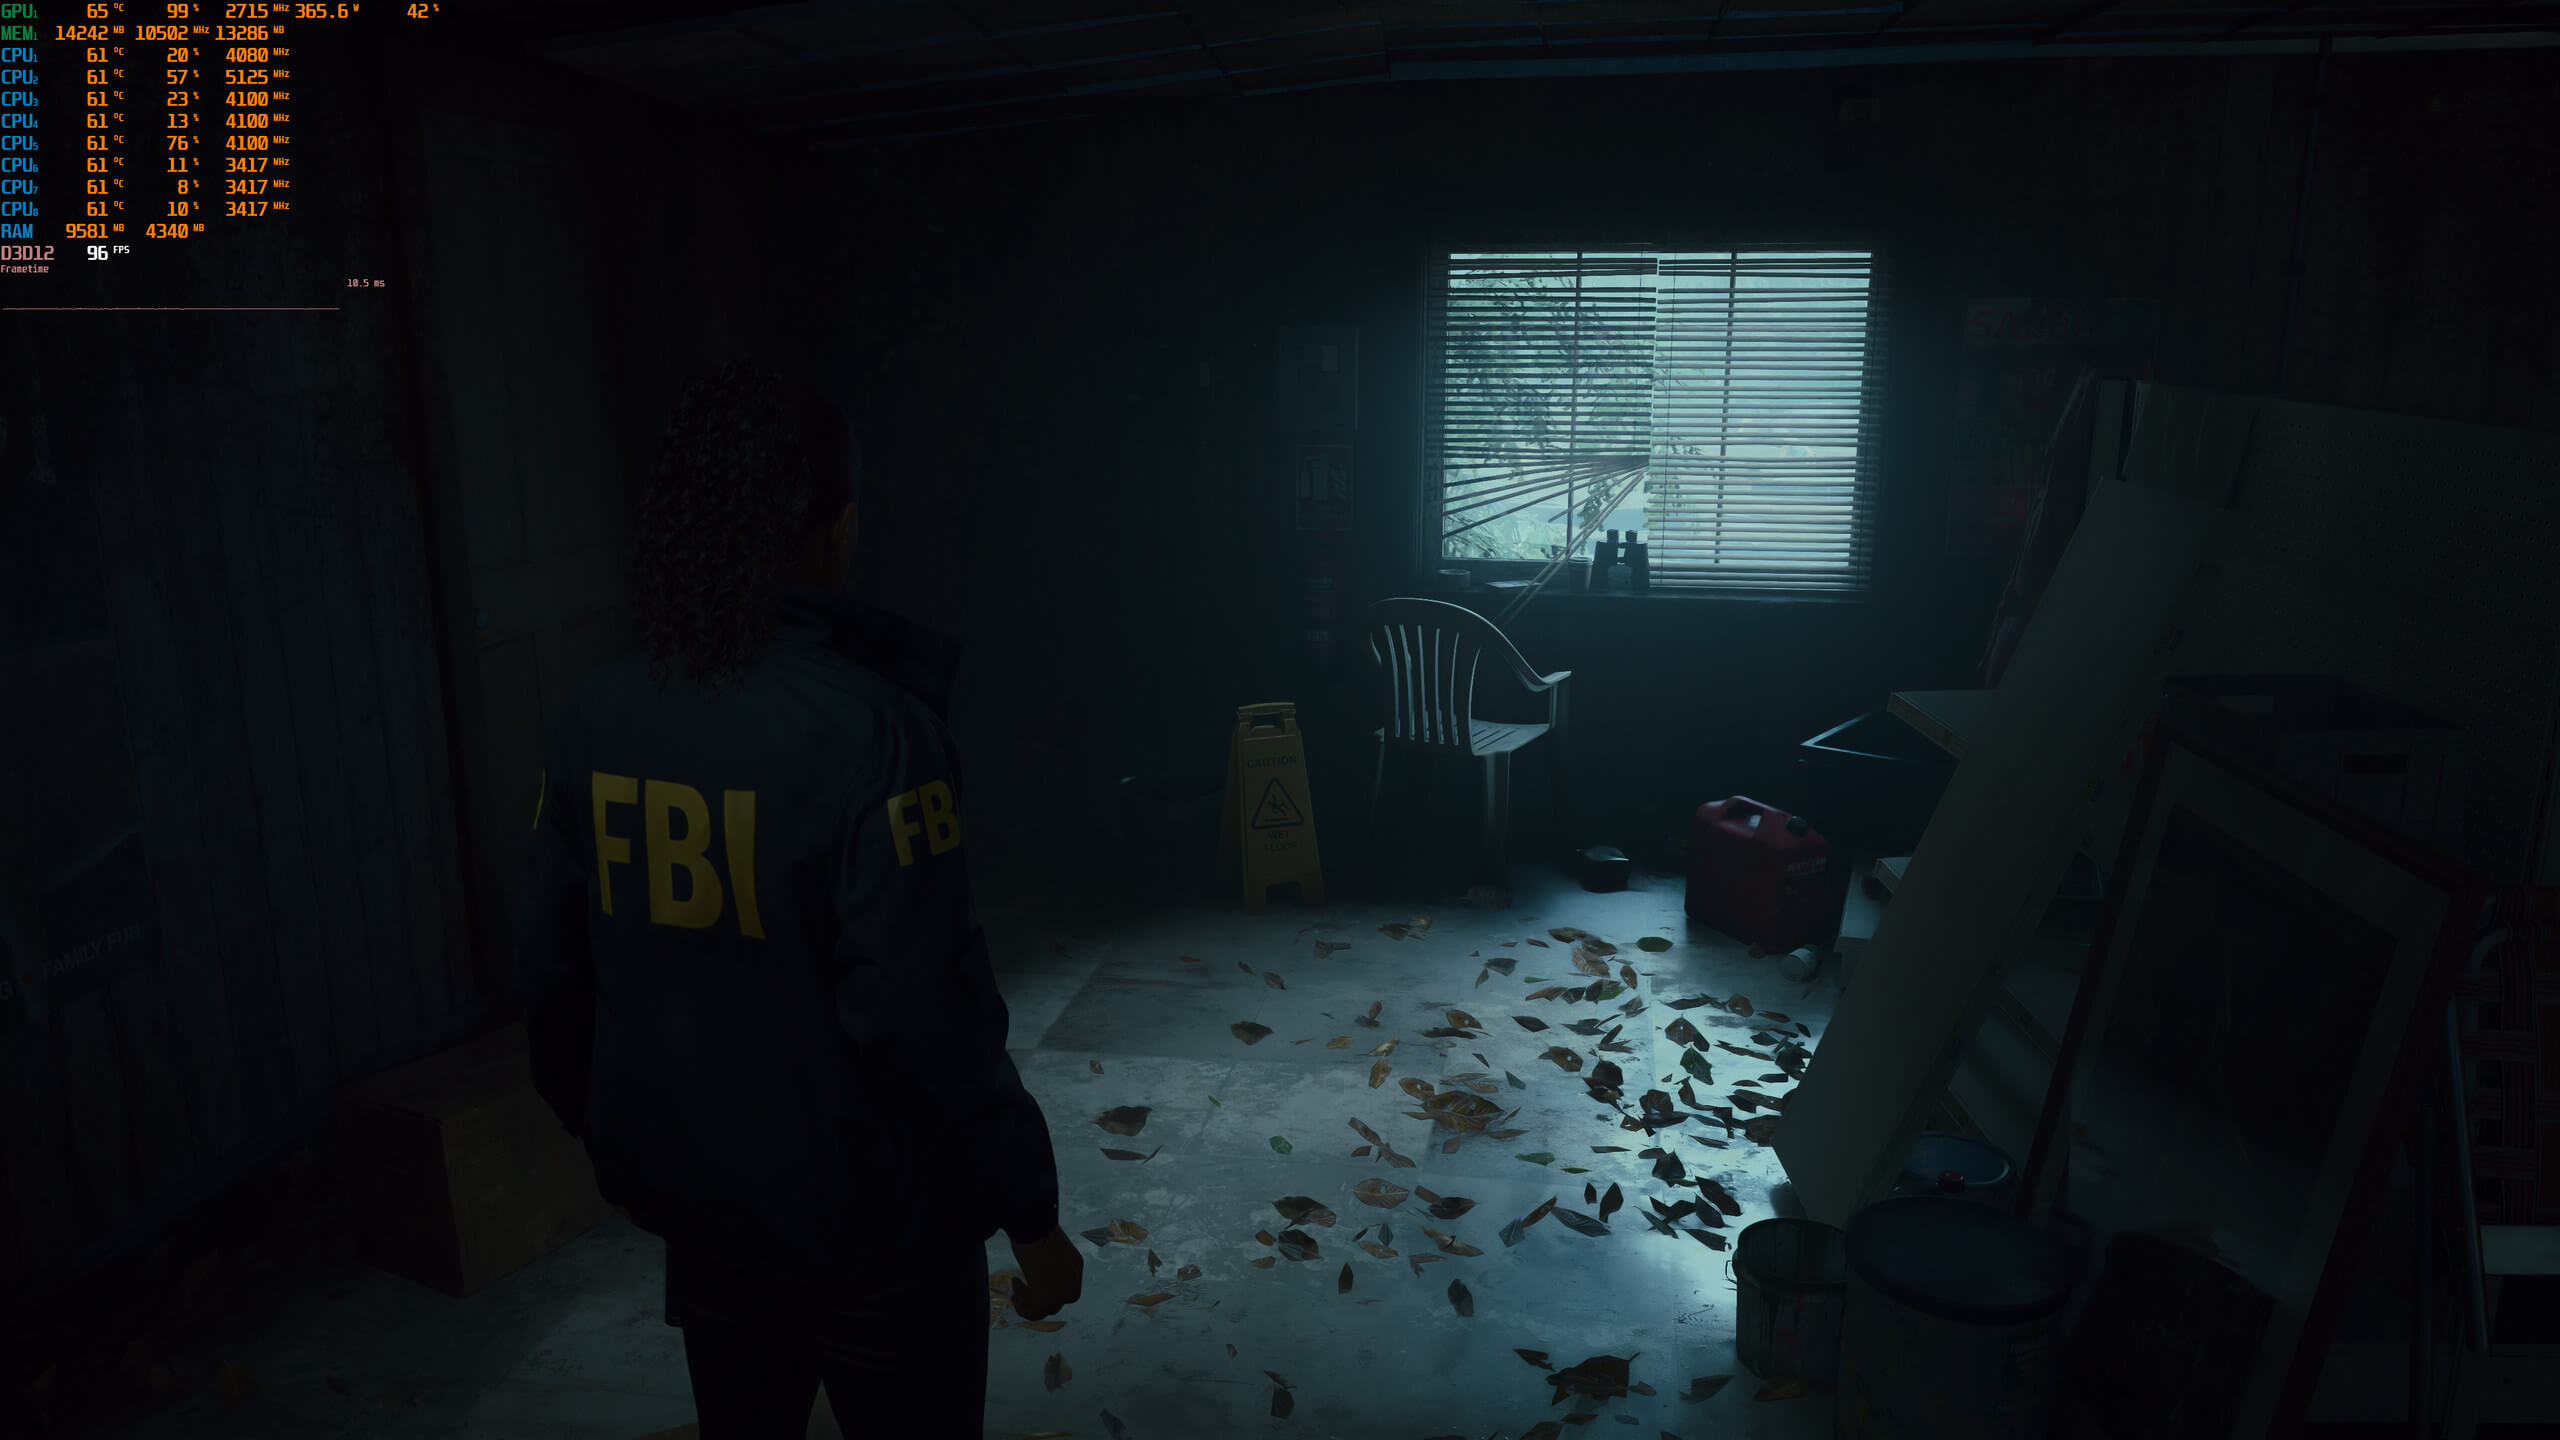 Alan Wake 2: a deep dive into Remedy's high-end ray tracing